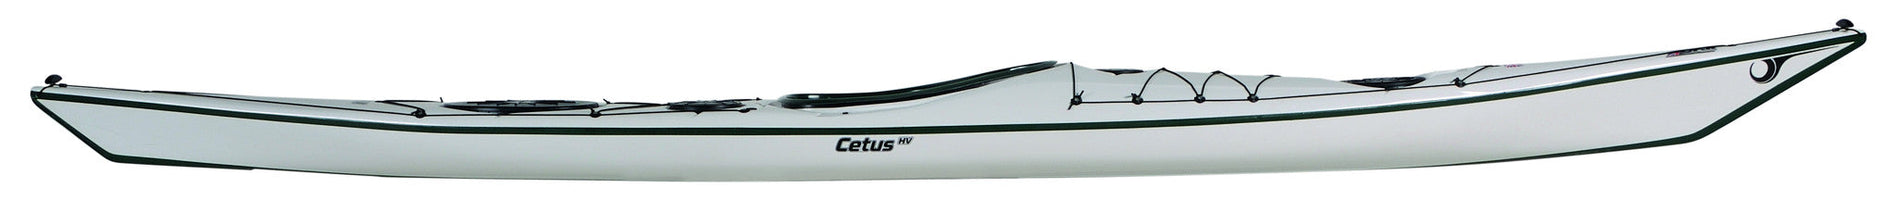 P & H Cetus (three sizes) Infusion Molded Carbon/Kevlar